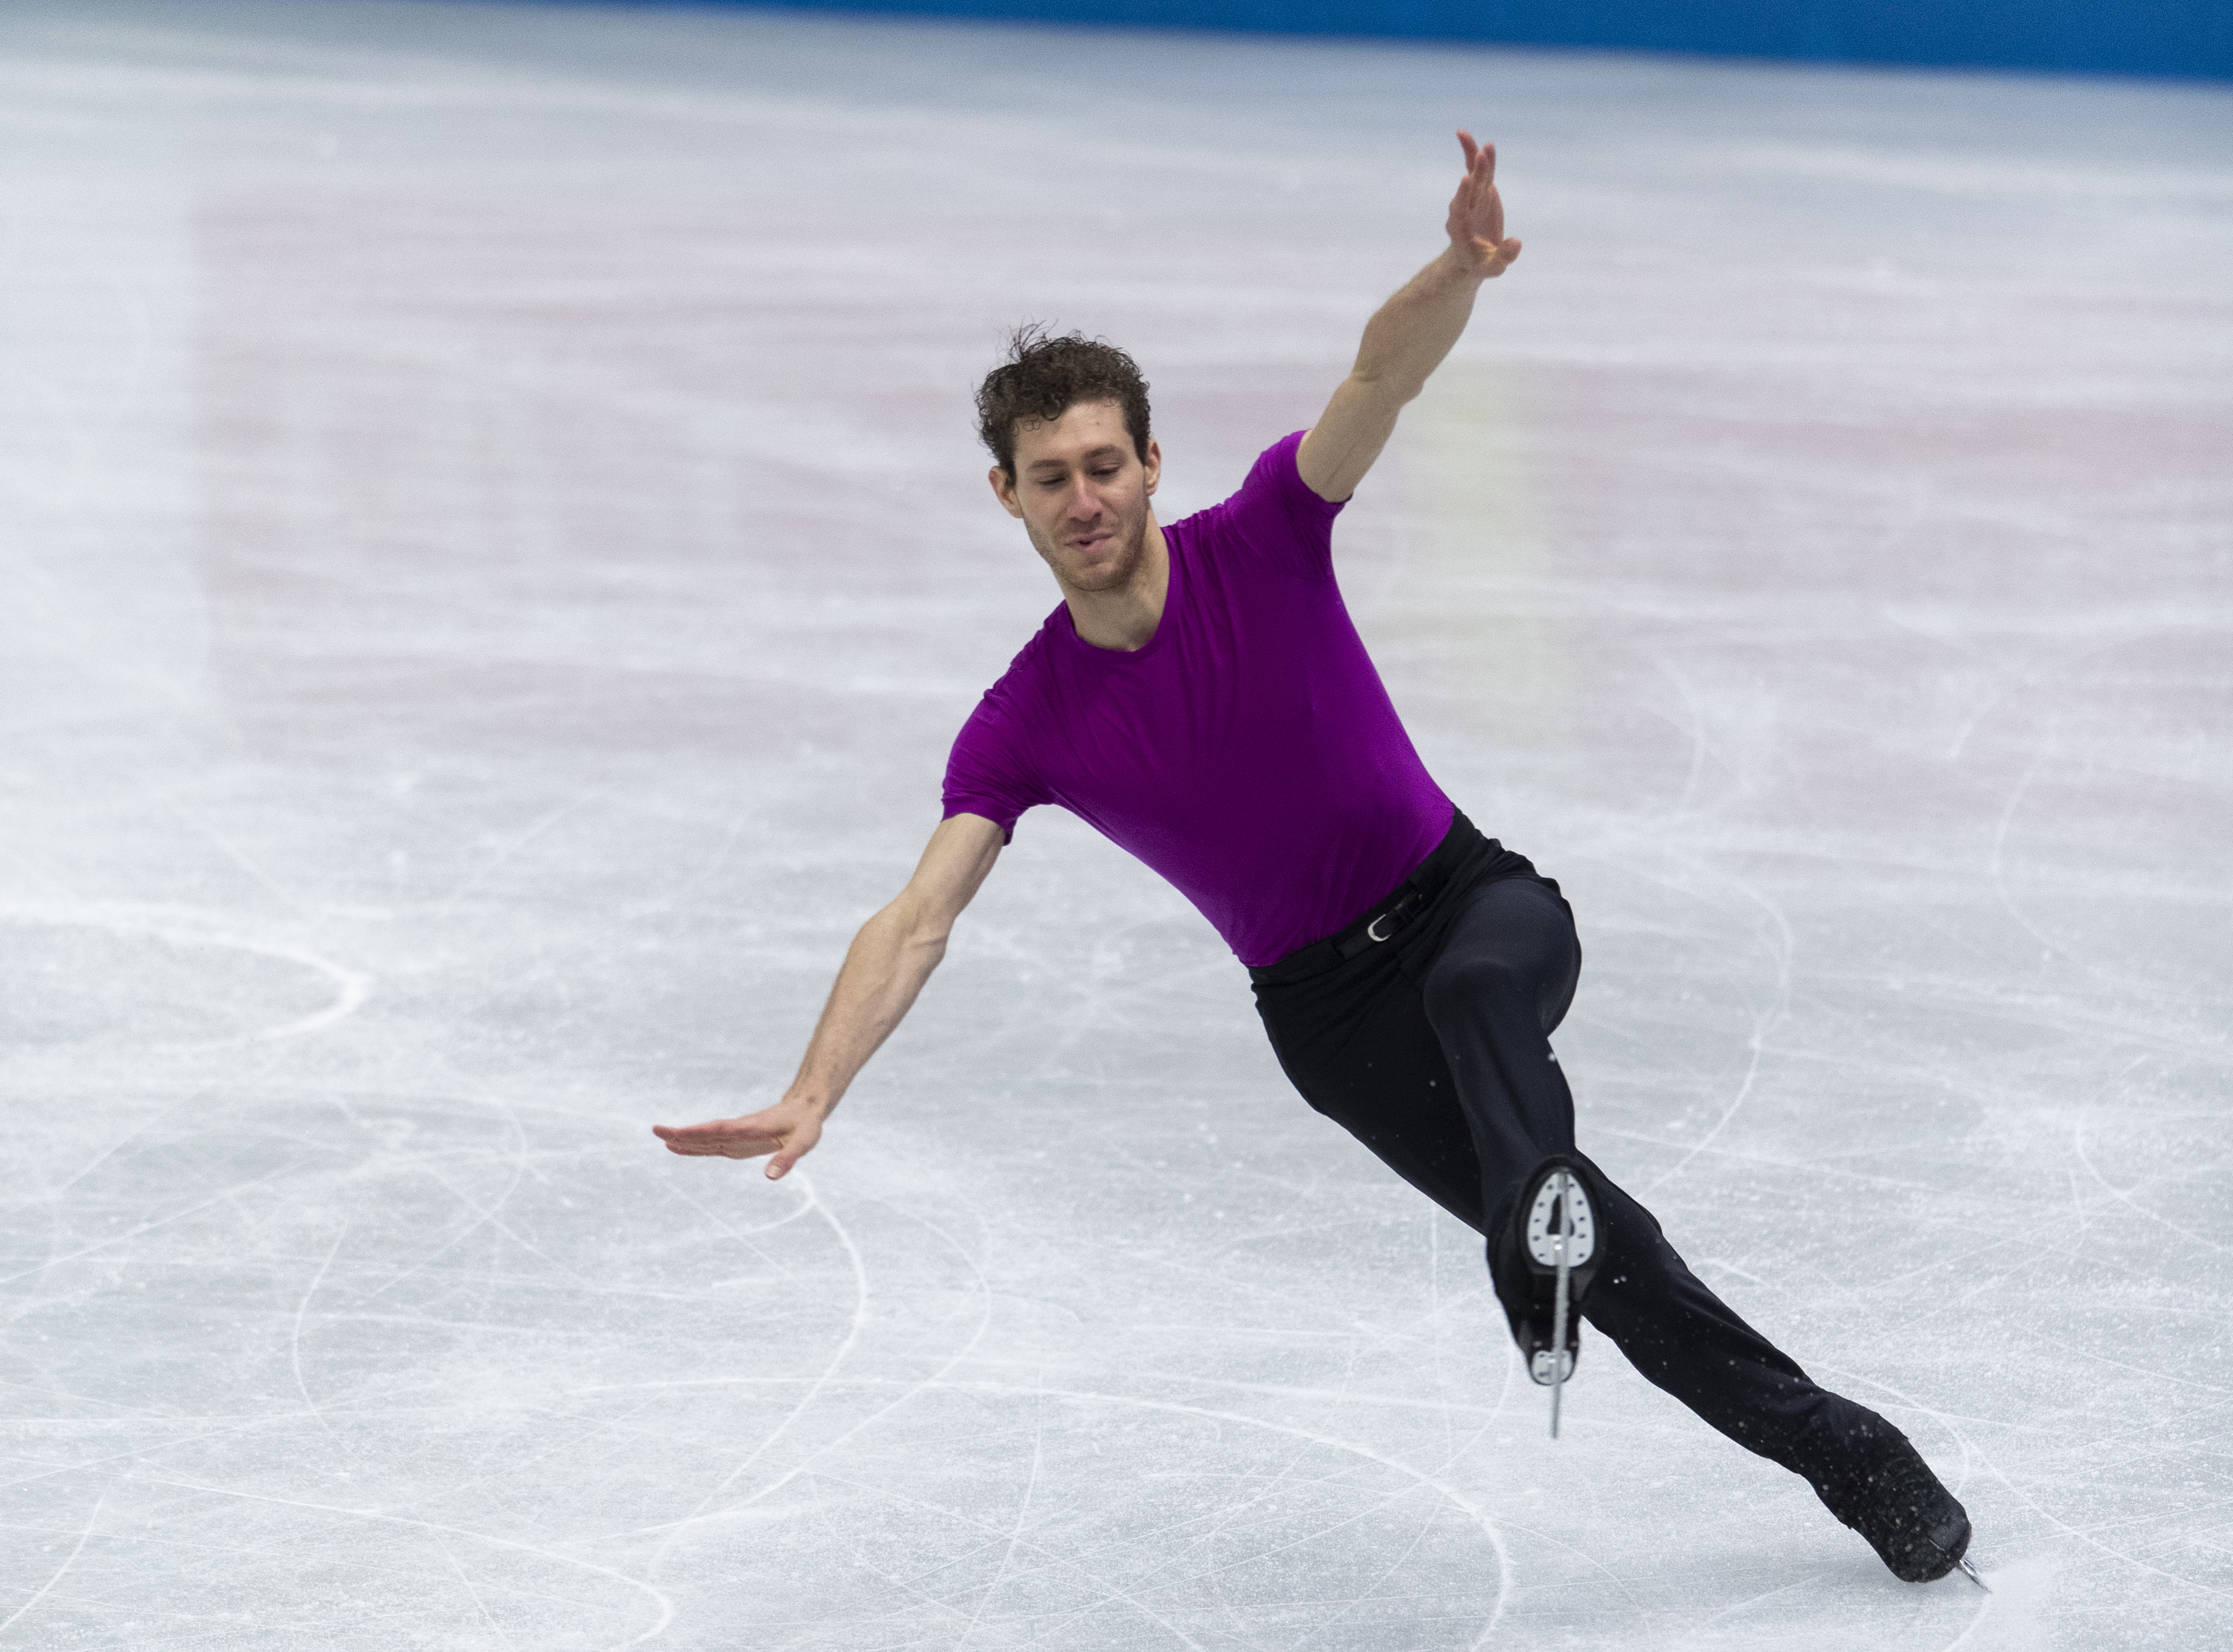 French Grand Prix 2021 figure skating Live stream, TV schedule, how to watch Internationaux de France